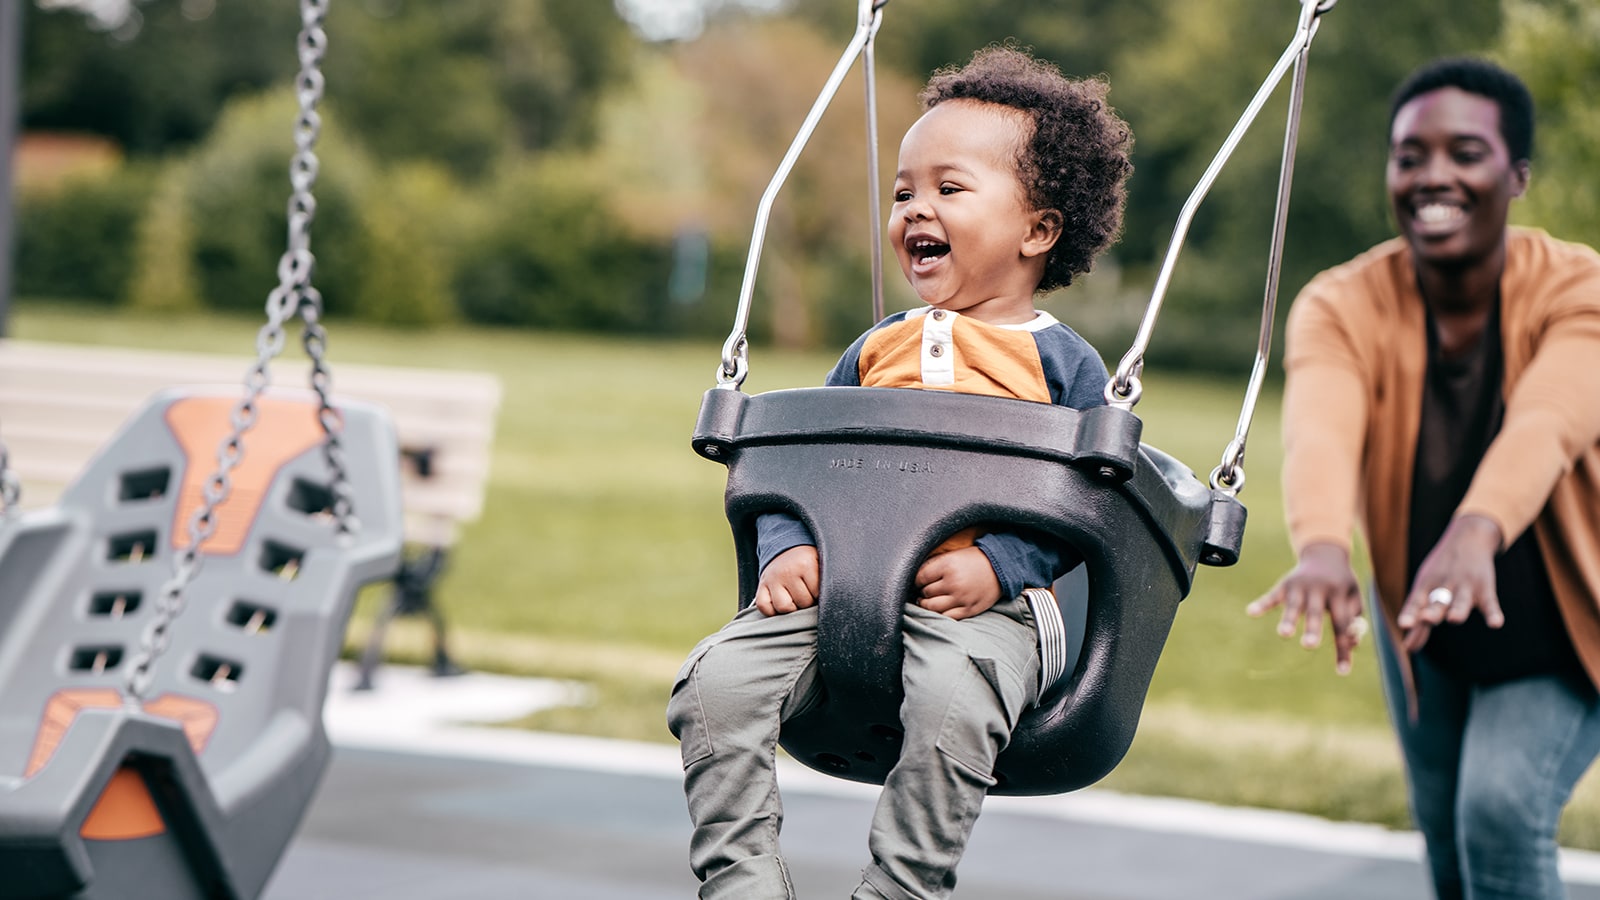 Parent pushing child on a swing